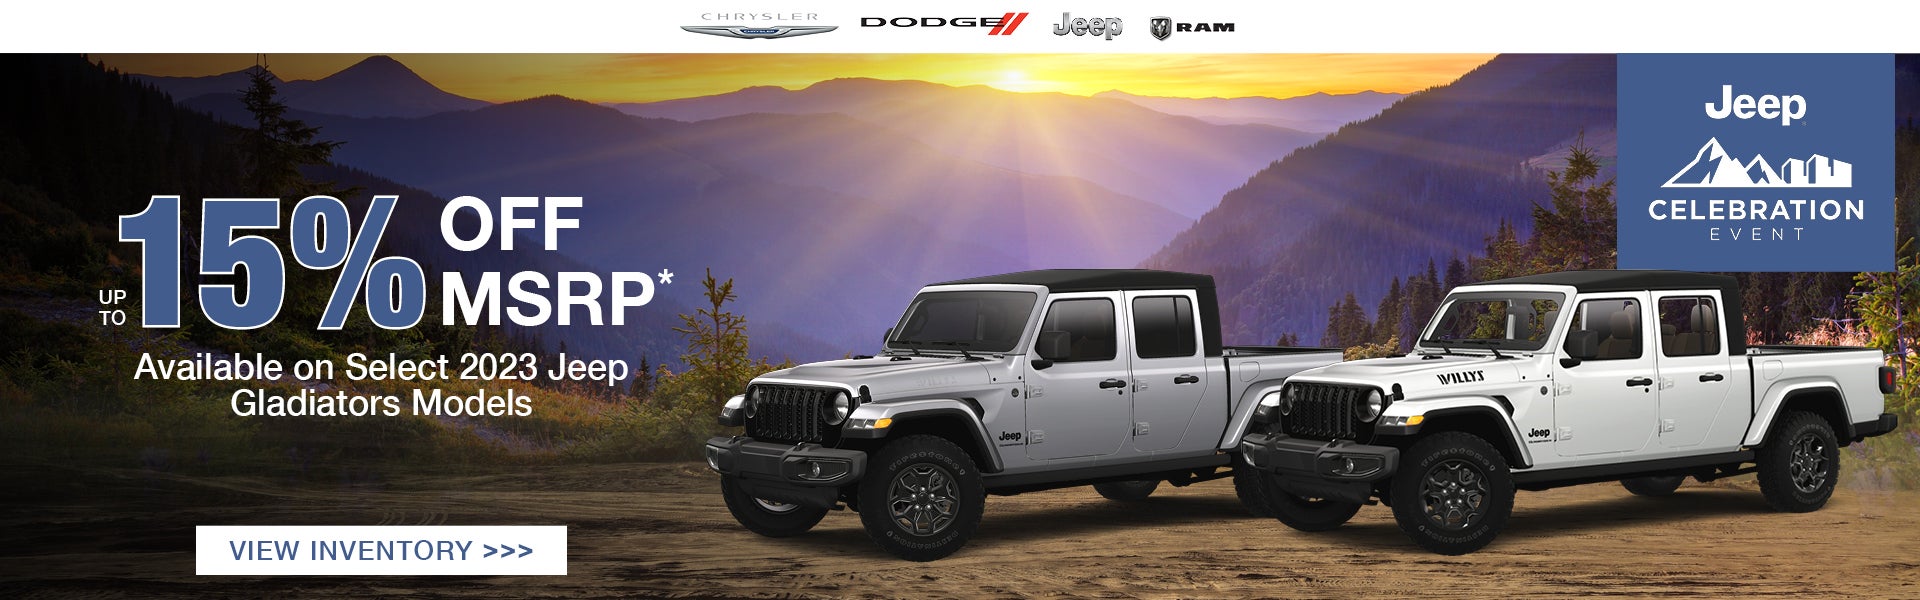 Up to 15% off MSRP on 2023 Jeep Gladiators